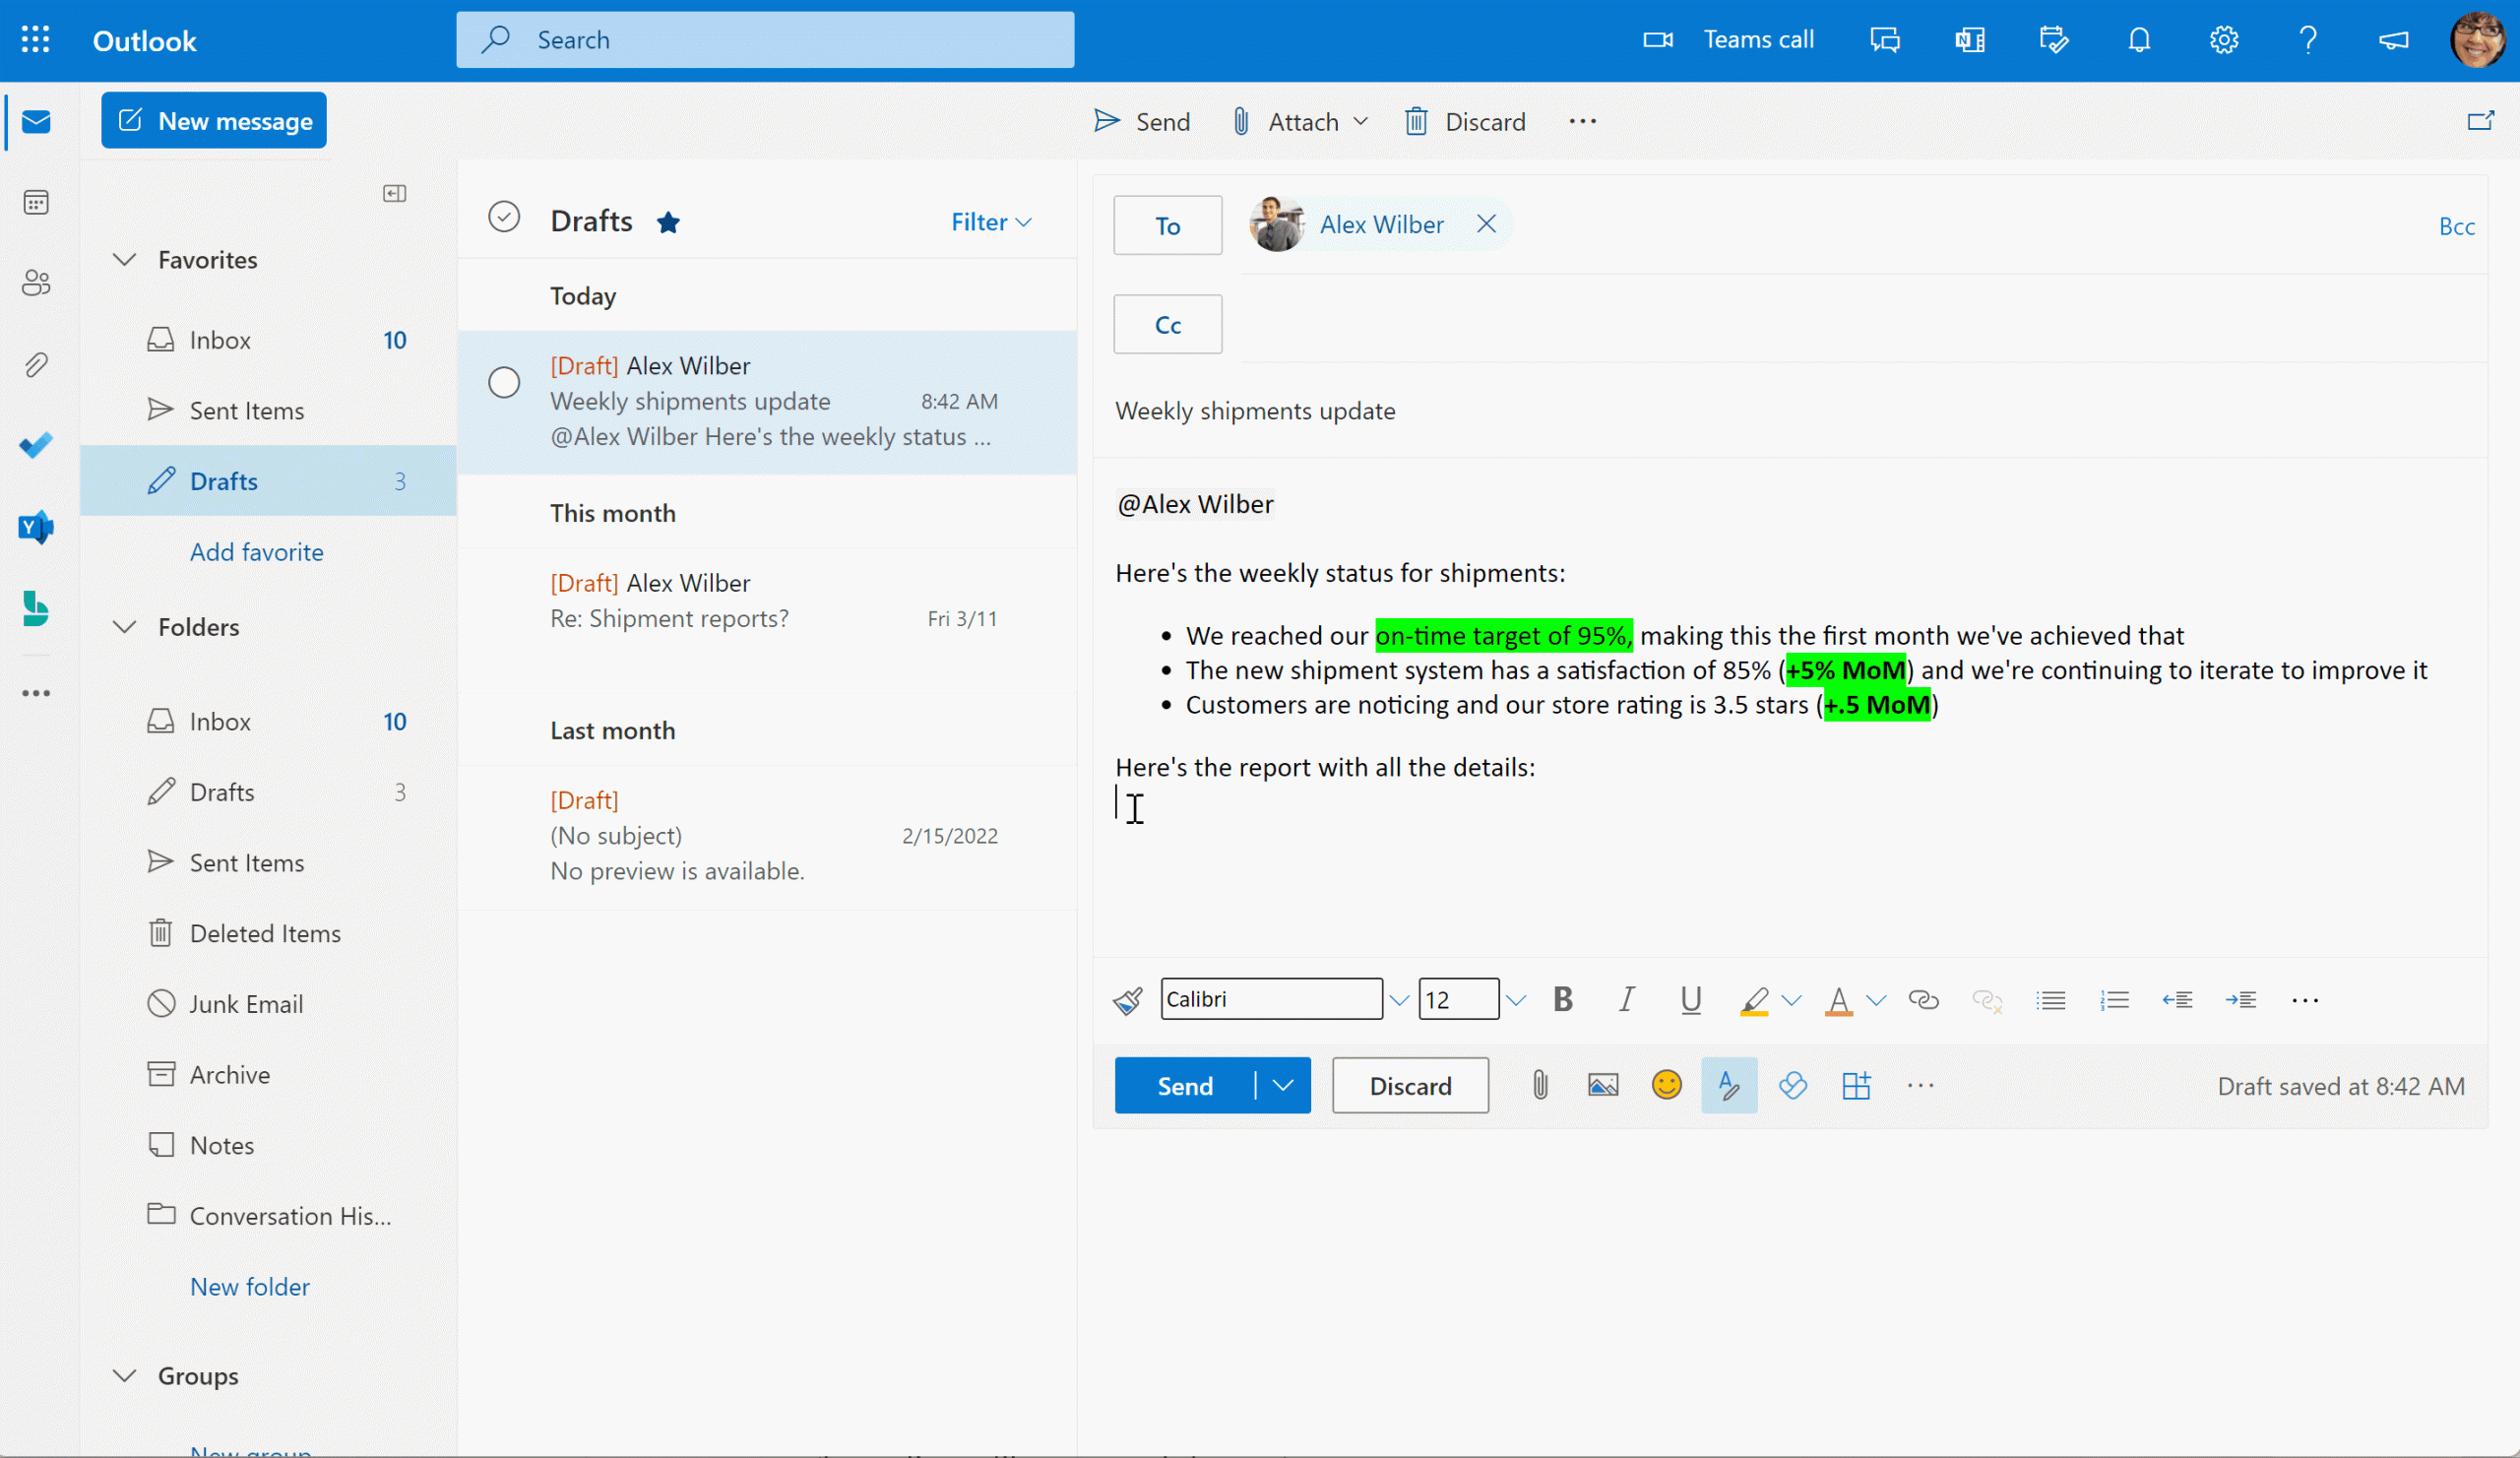 Animated GIF of inserting a Power BI rich card into a weekly status email using Outlook. The card is inserted by using the apps button, selecting Power BI, seeing a list of recently opened items, searching for a specific report, picking the report, inserting the card, and sending the email.